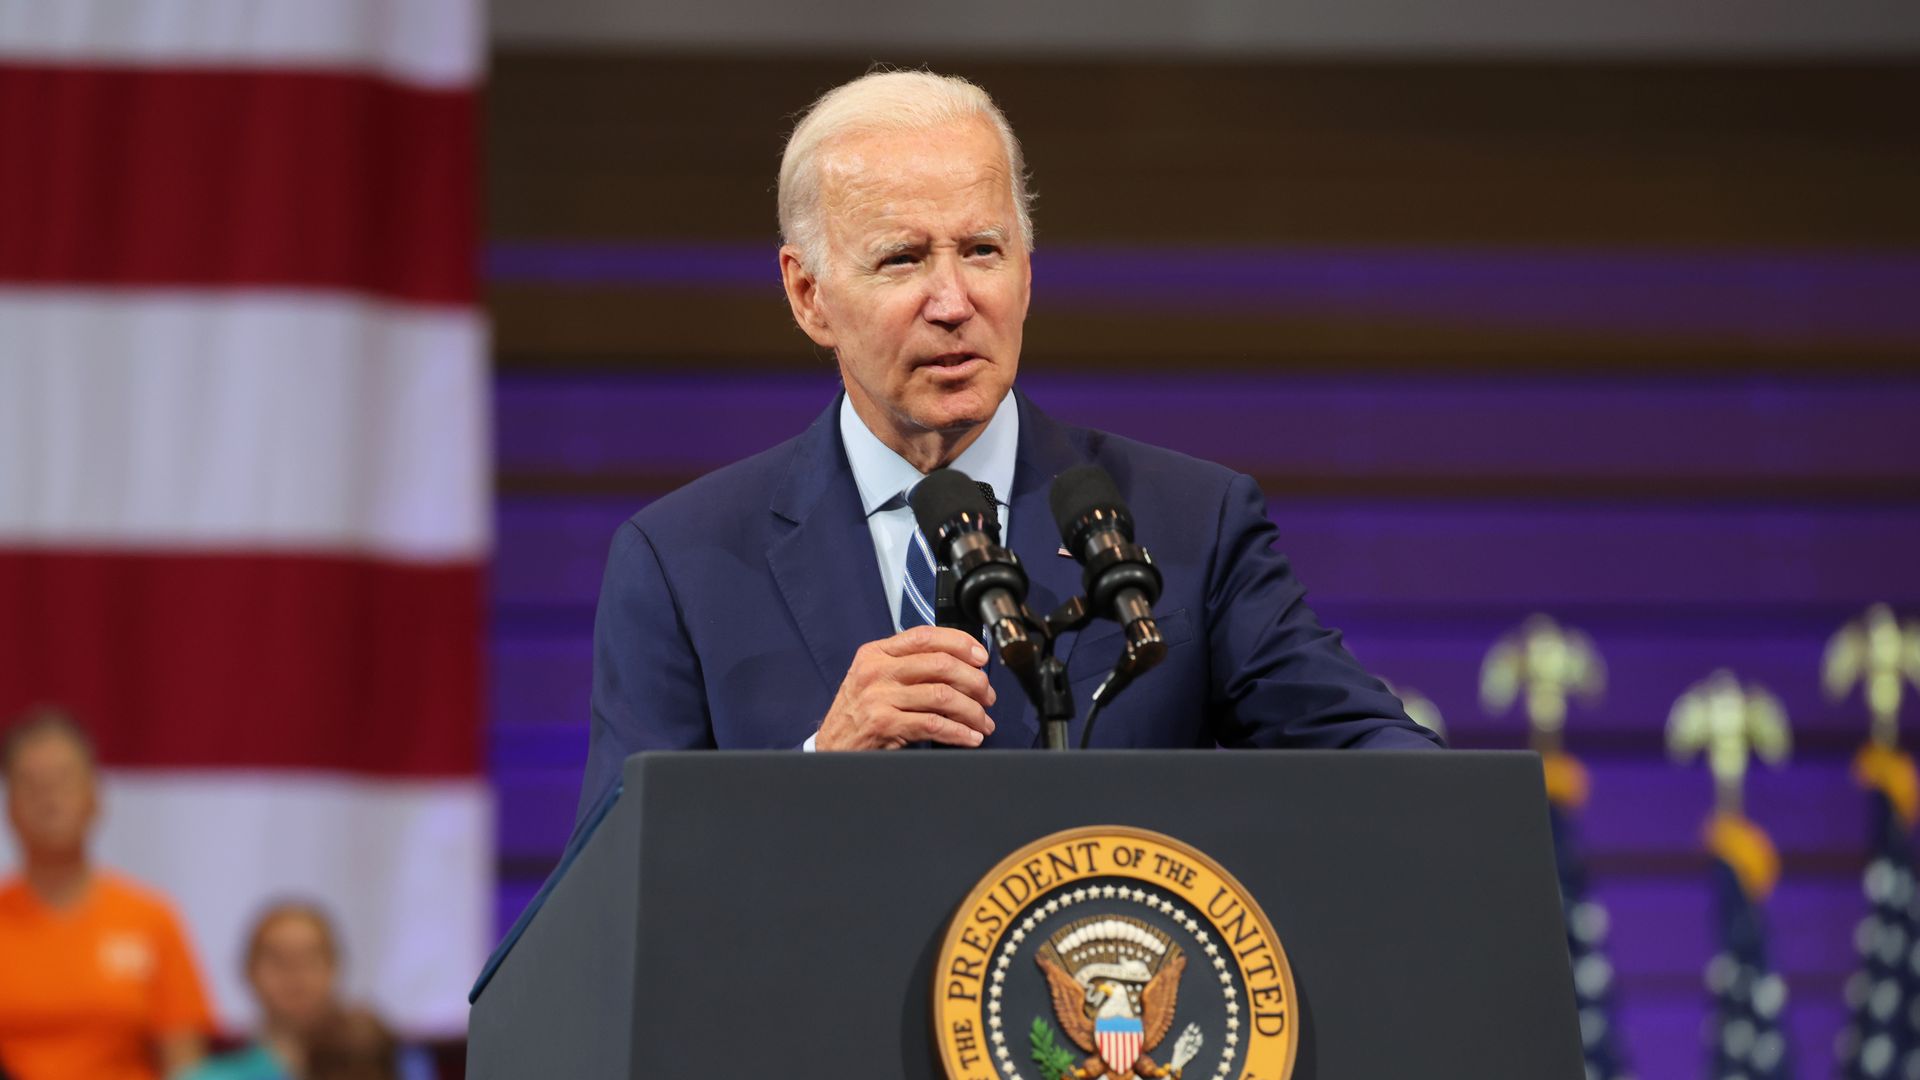 Photo of Joe Biden speaking from a podium at an event